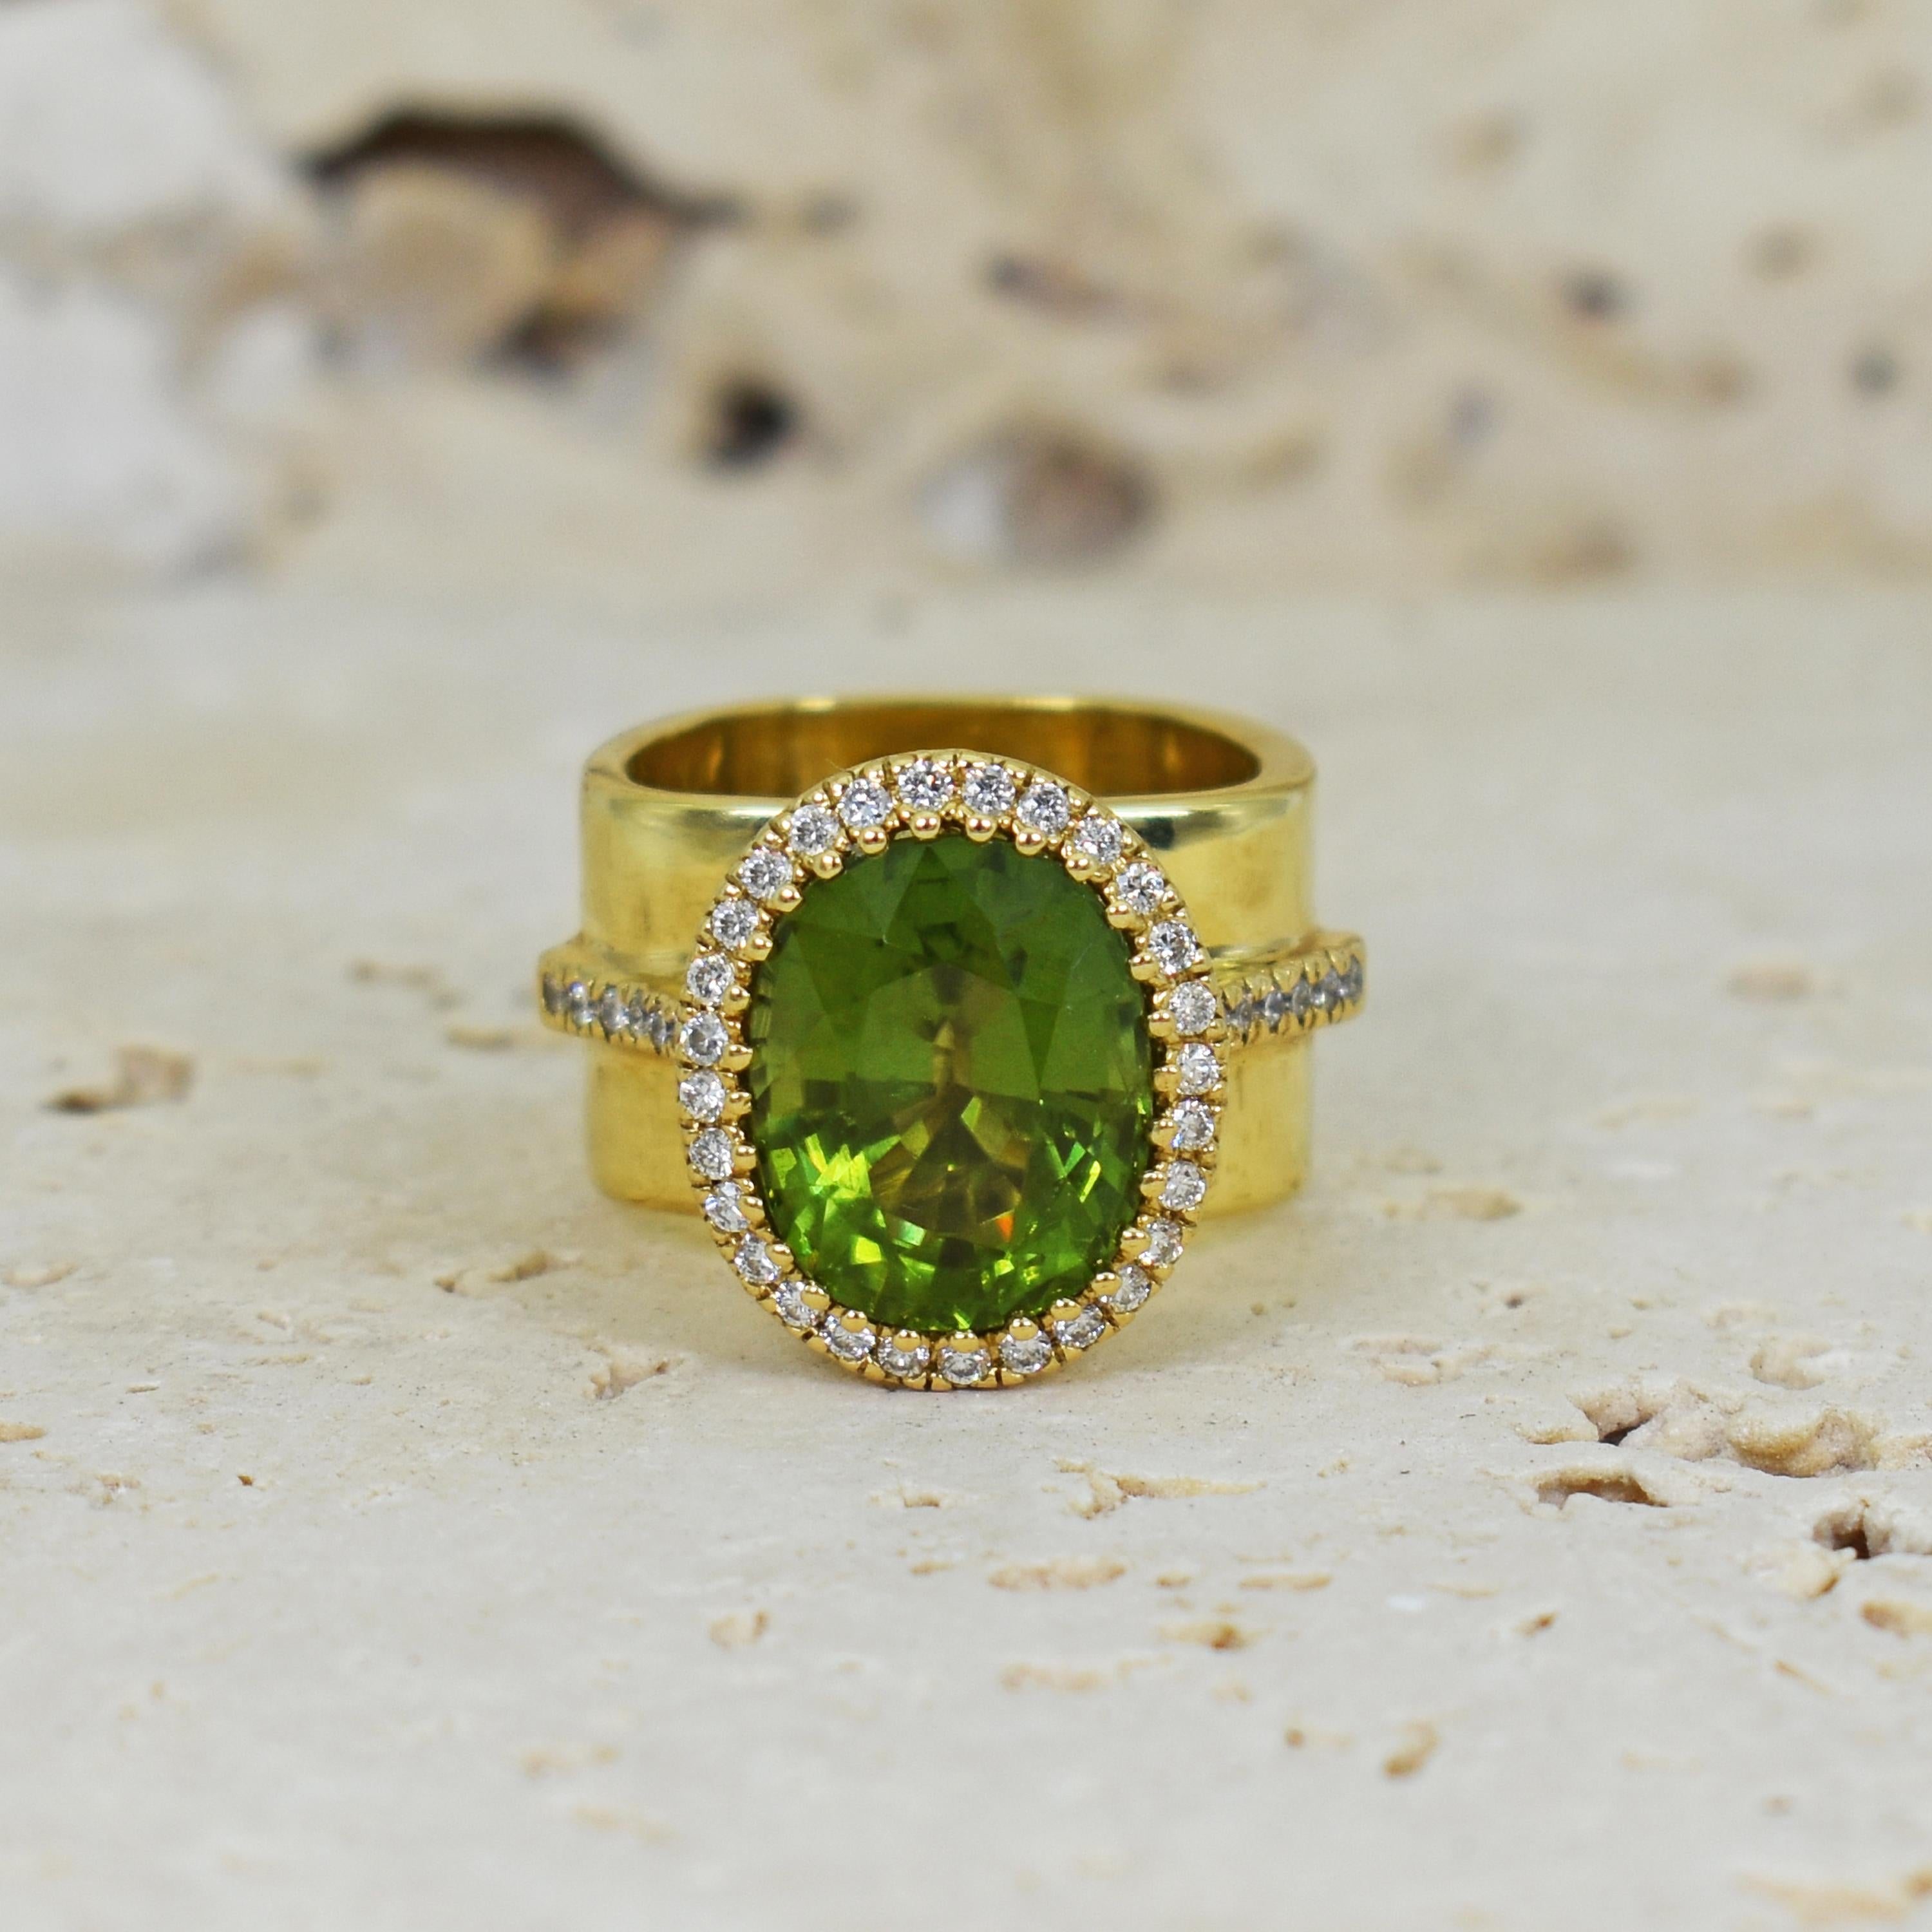 8.49 carat oval Burmese Peridot with Diamond halo and side accents (weighing a total of .55 carat, SI1 in clarity, G in color) set in 18k yellow gold with scalloped undercarriage on a solid 18k yellow gold square band. Size 7. Gorgeous Burma Peridot